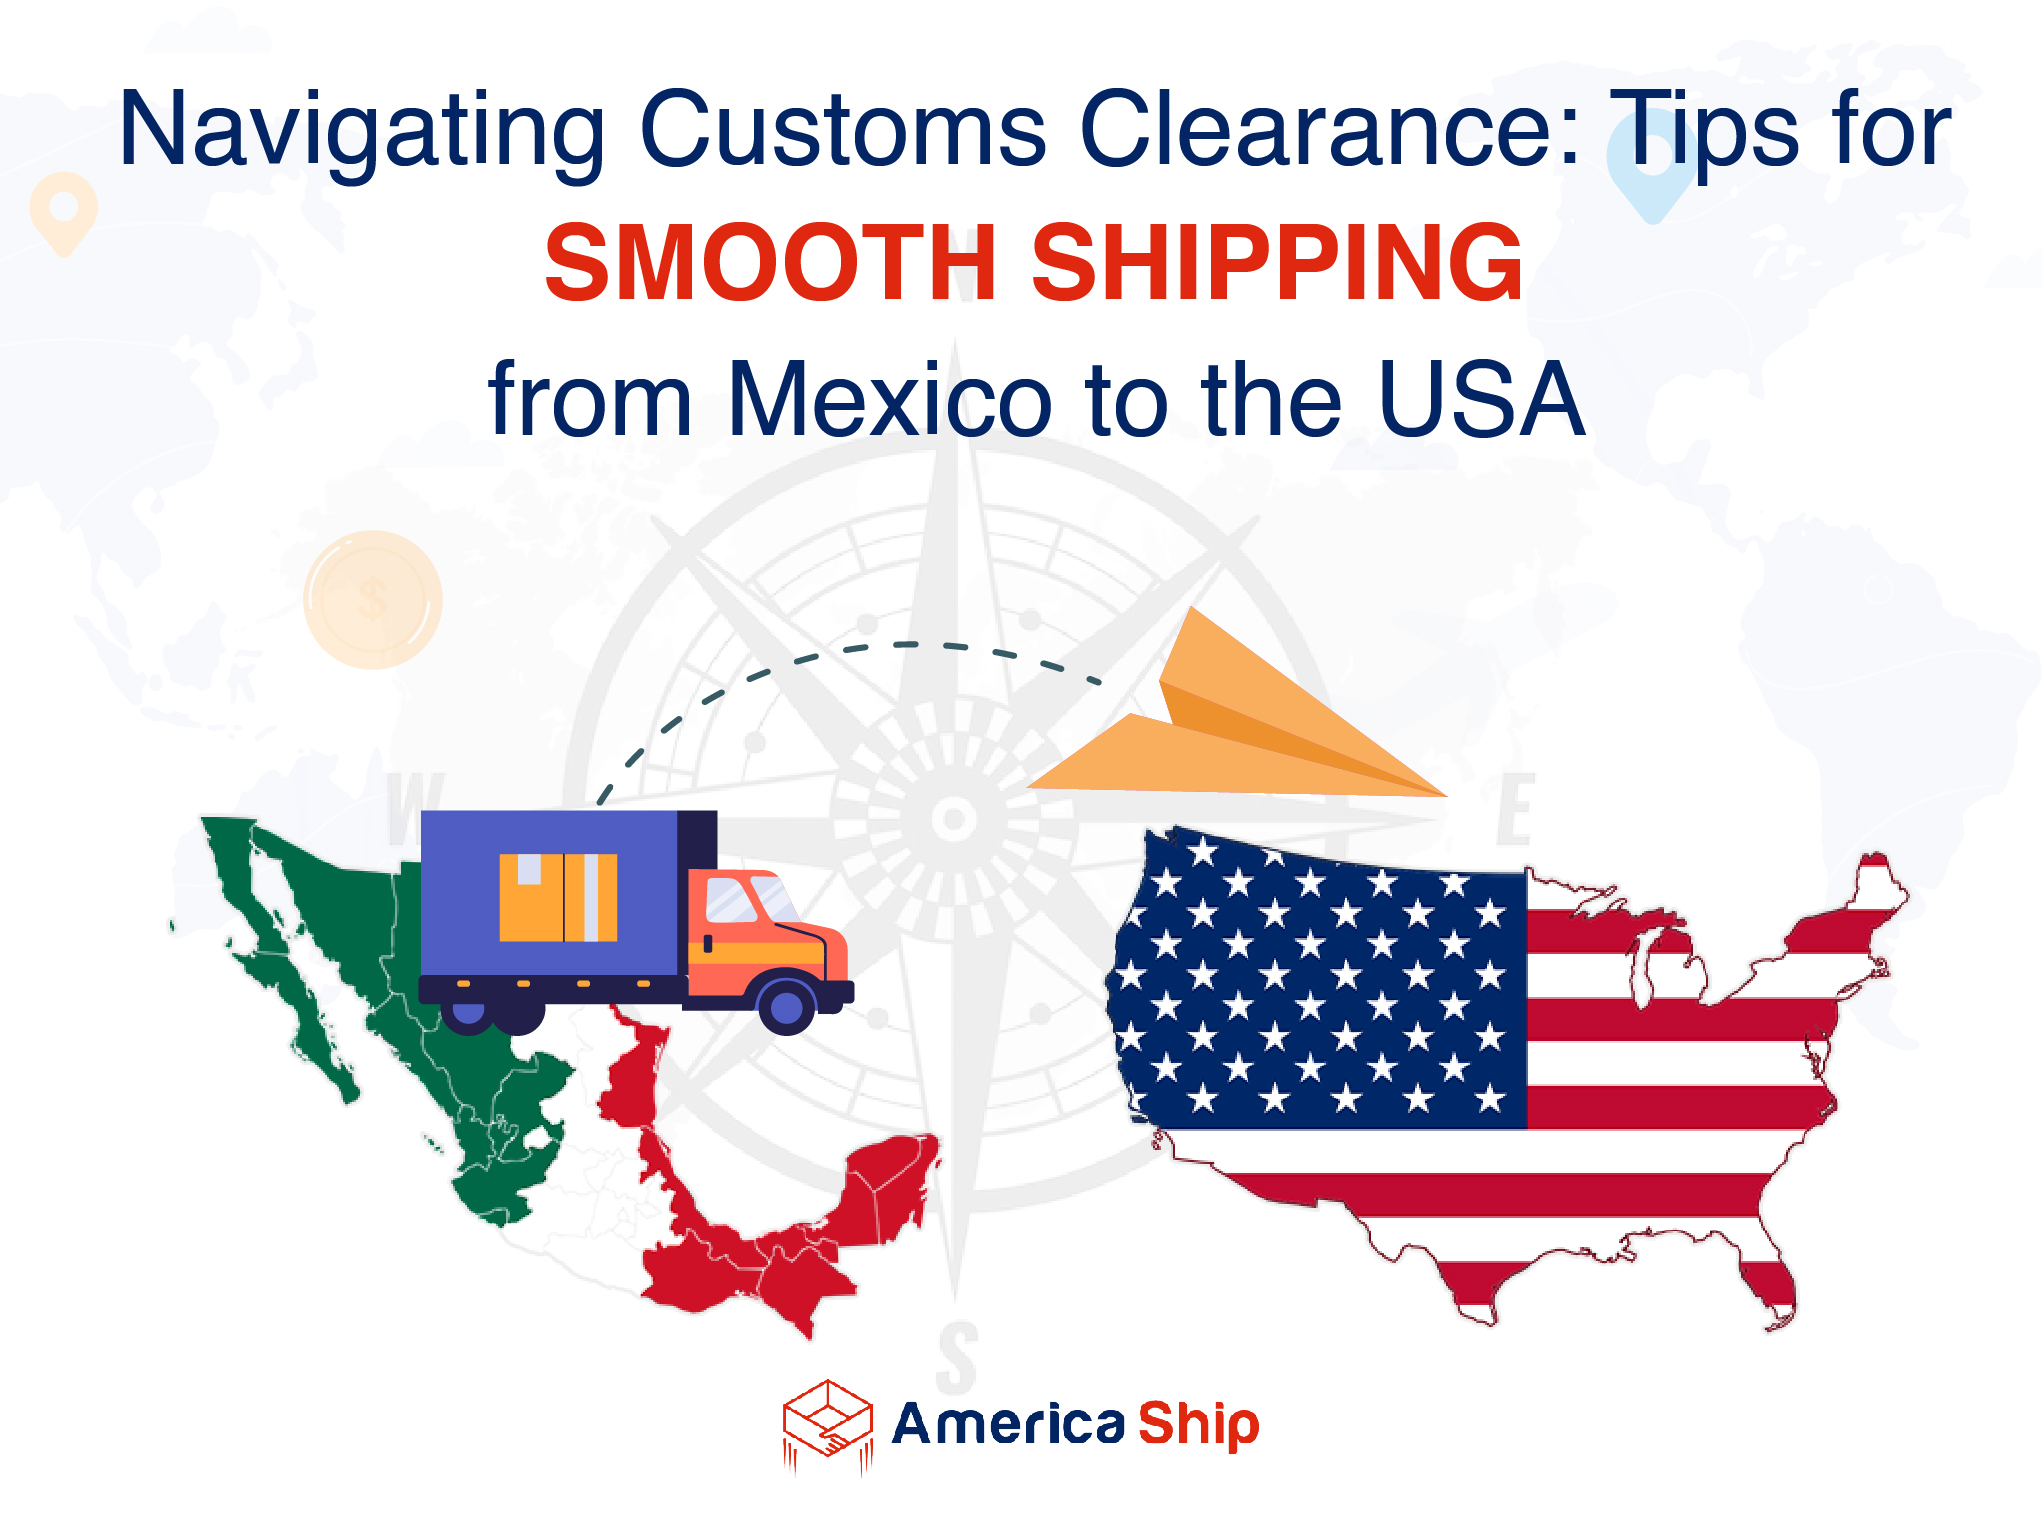 Navigating Customs Clearance: Tips for Smooth Shipping from Mexico to the USA